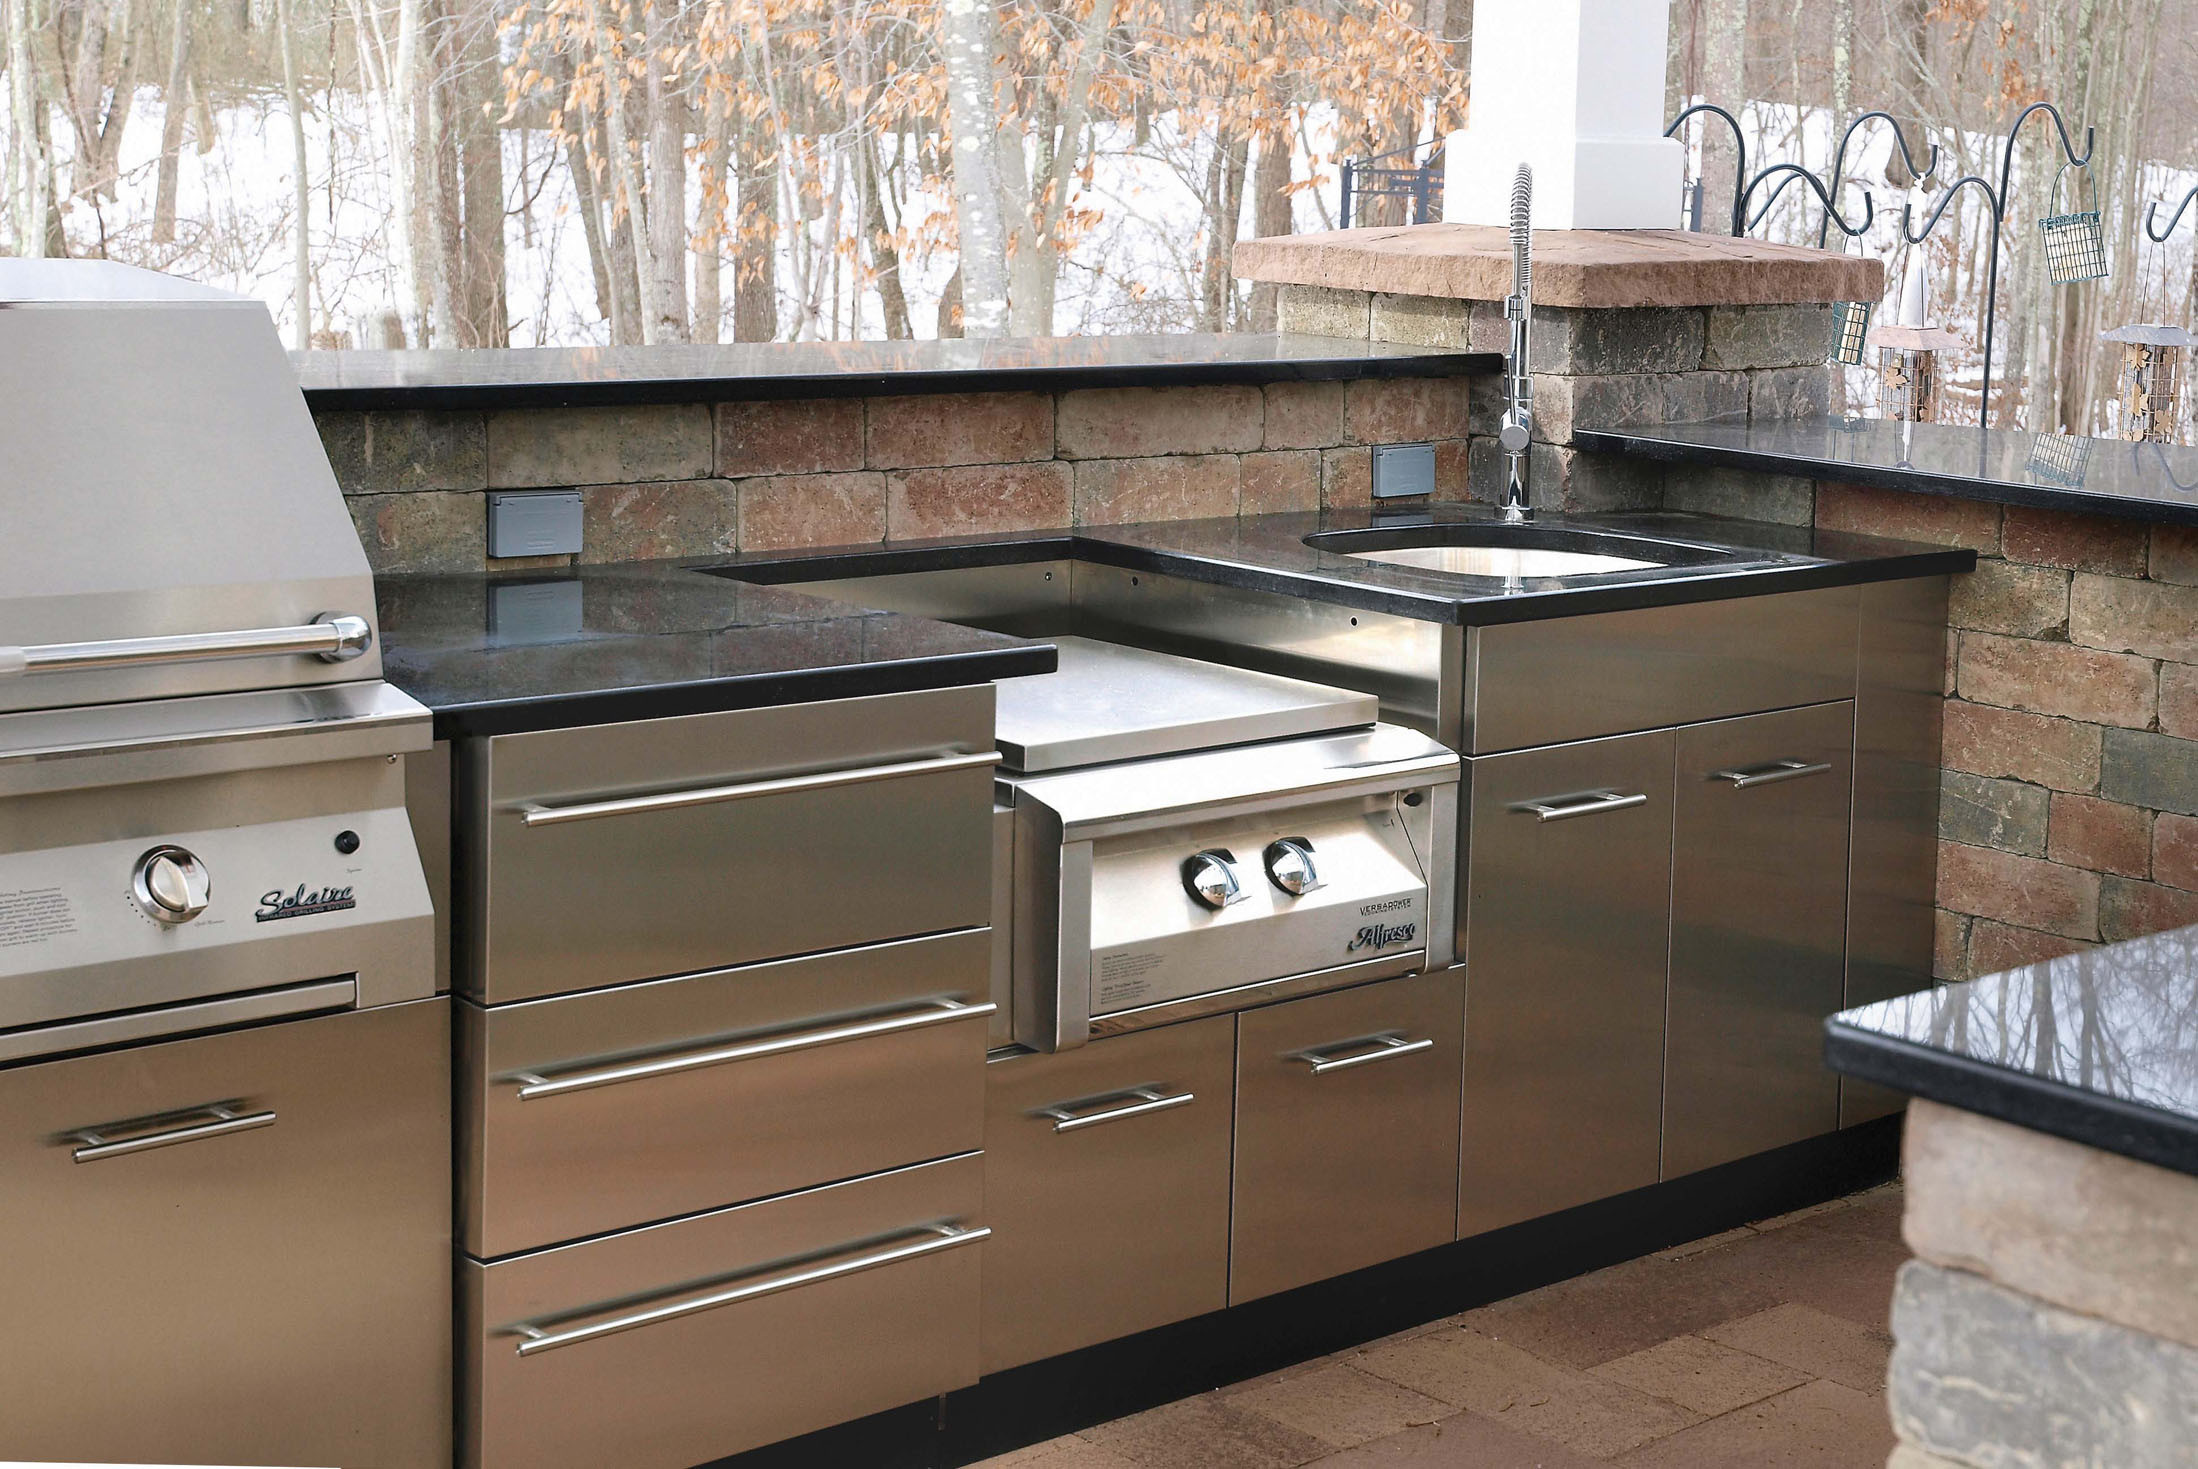 Stainless Steel Outdoor Kitchen Cabinets
 Outdoor Stainless Kitchen in winter in CT